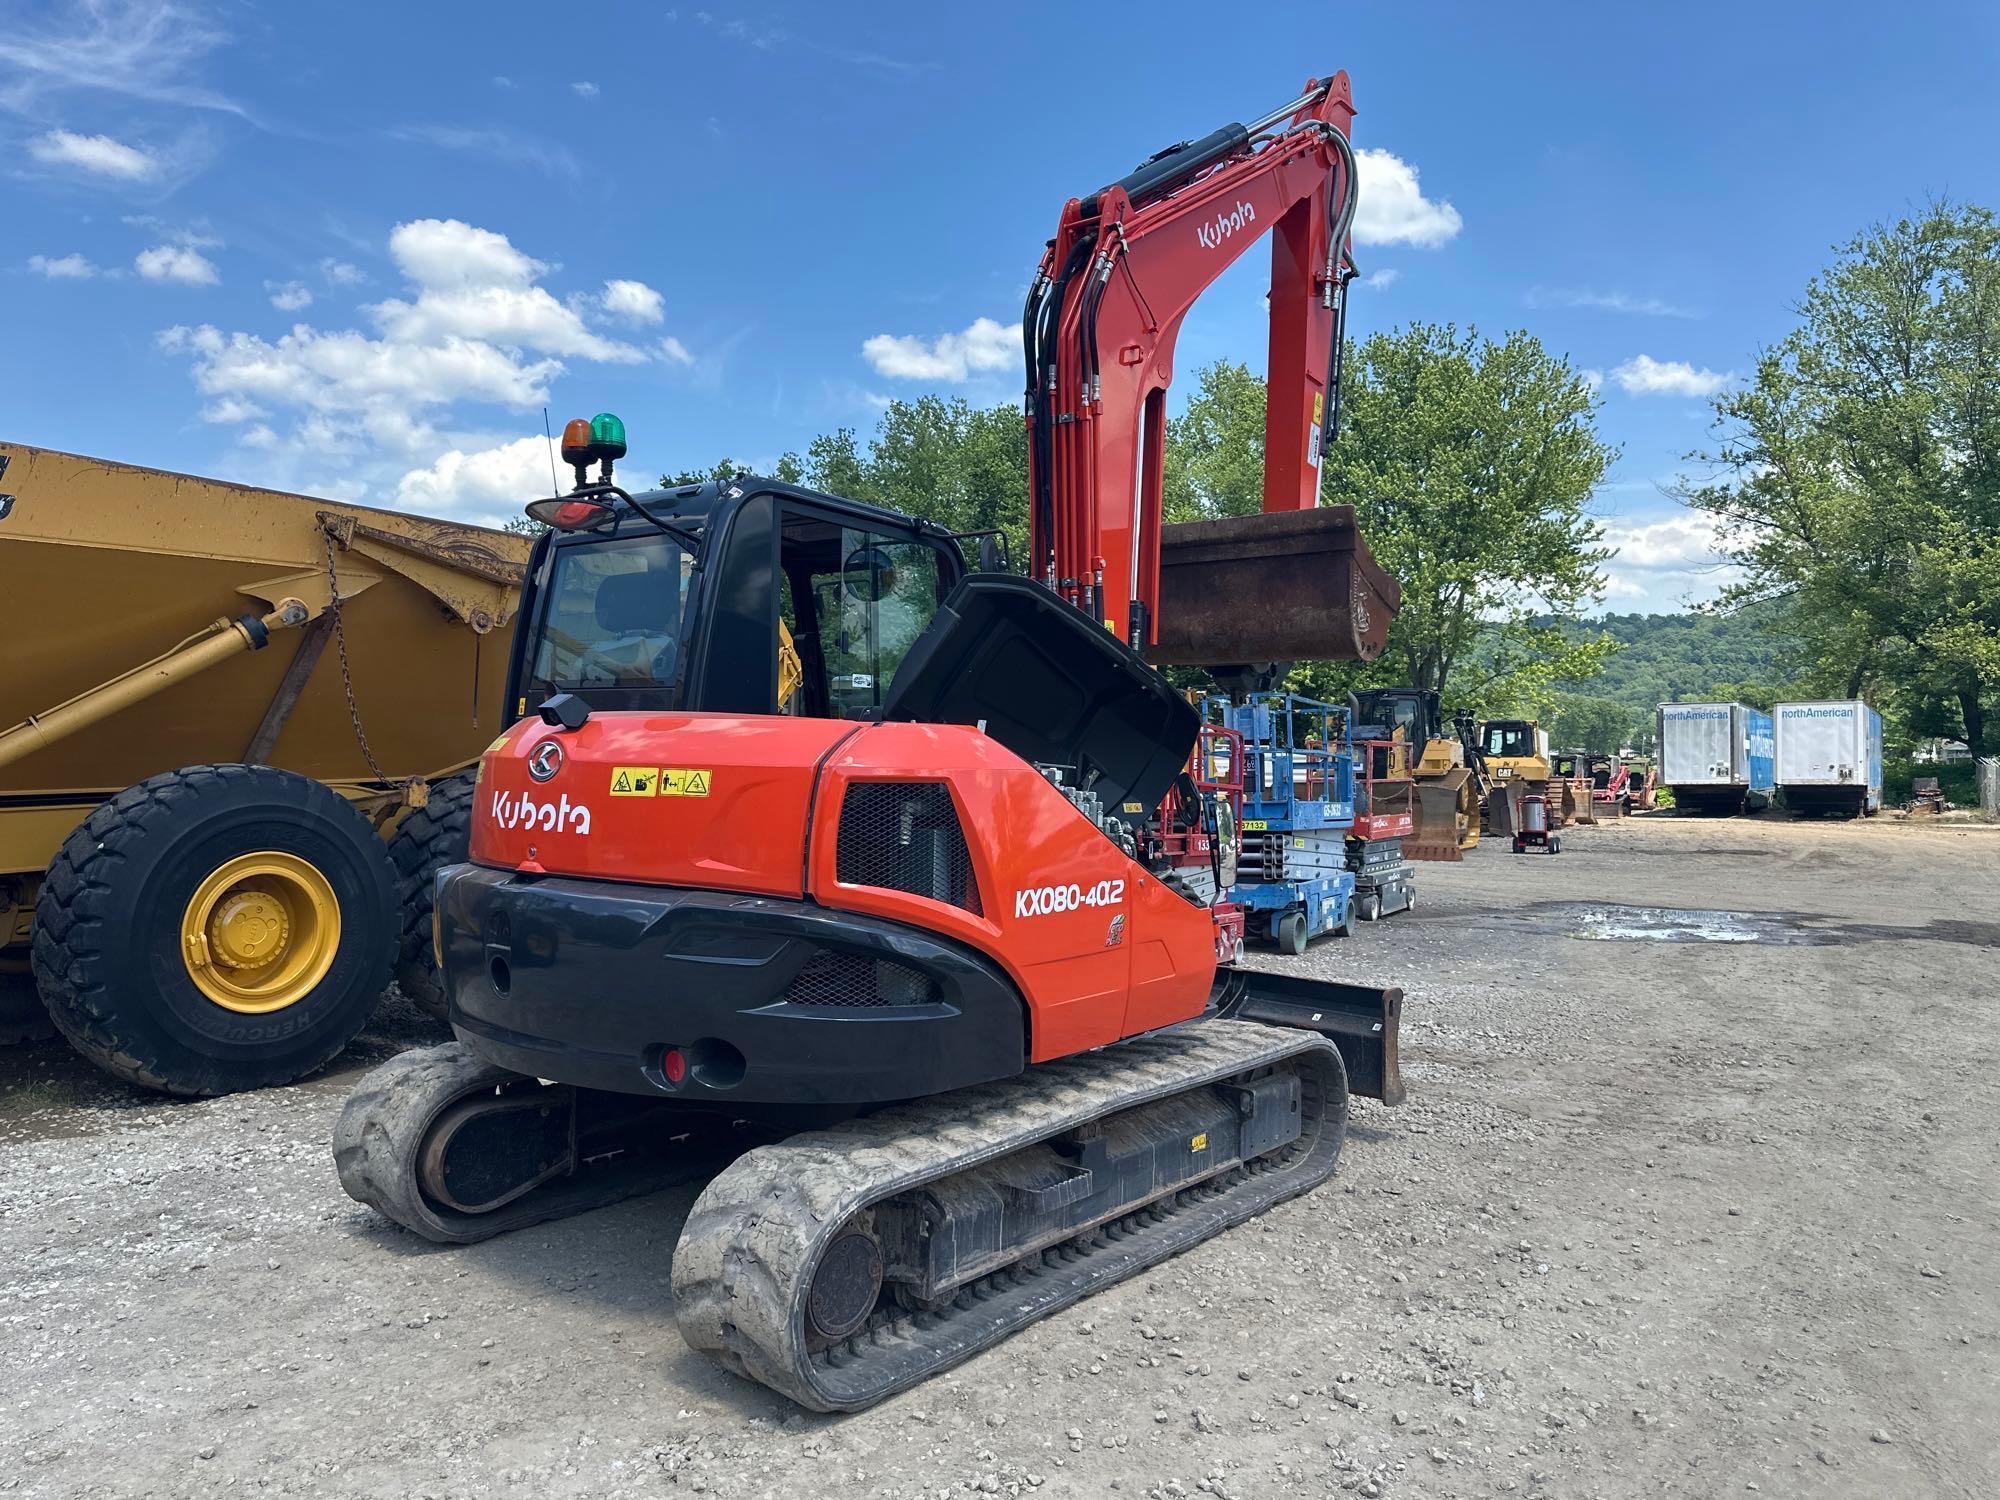 2022 KUBOTA KX80 HYDRAULIC EXCAVATOR SN:77044 powered by diesel engine, equipped with Cab, air,